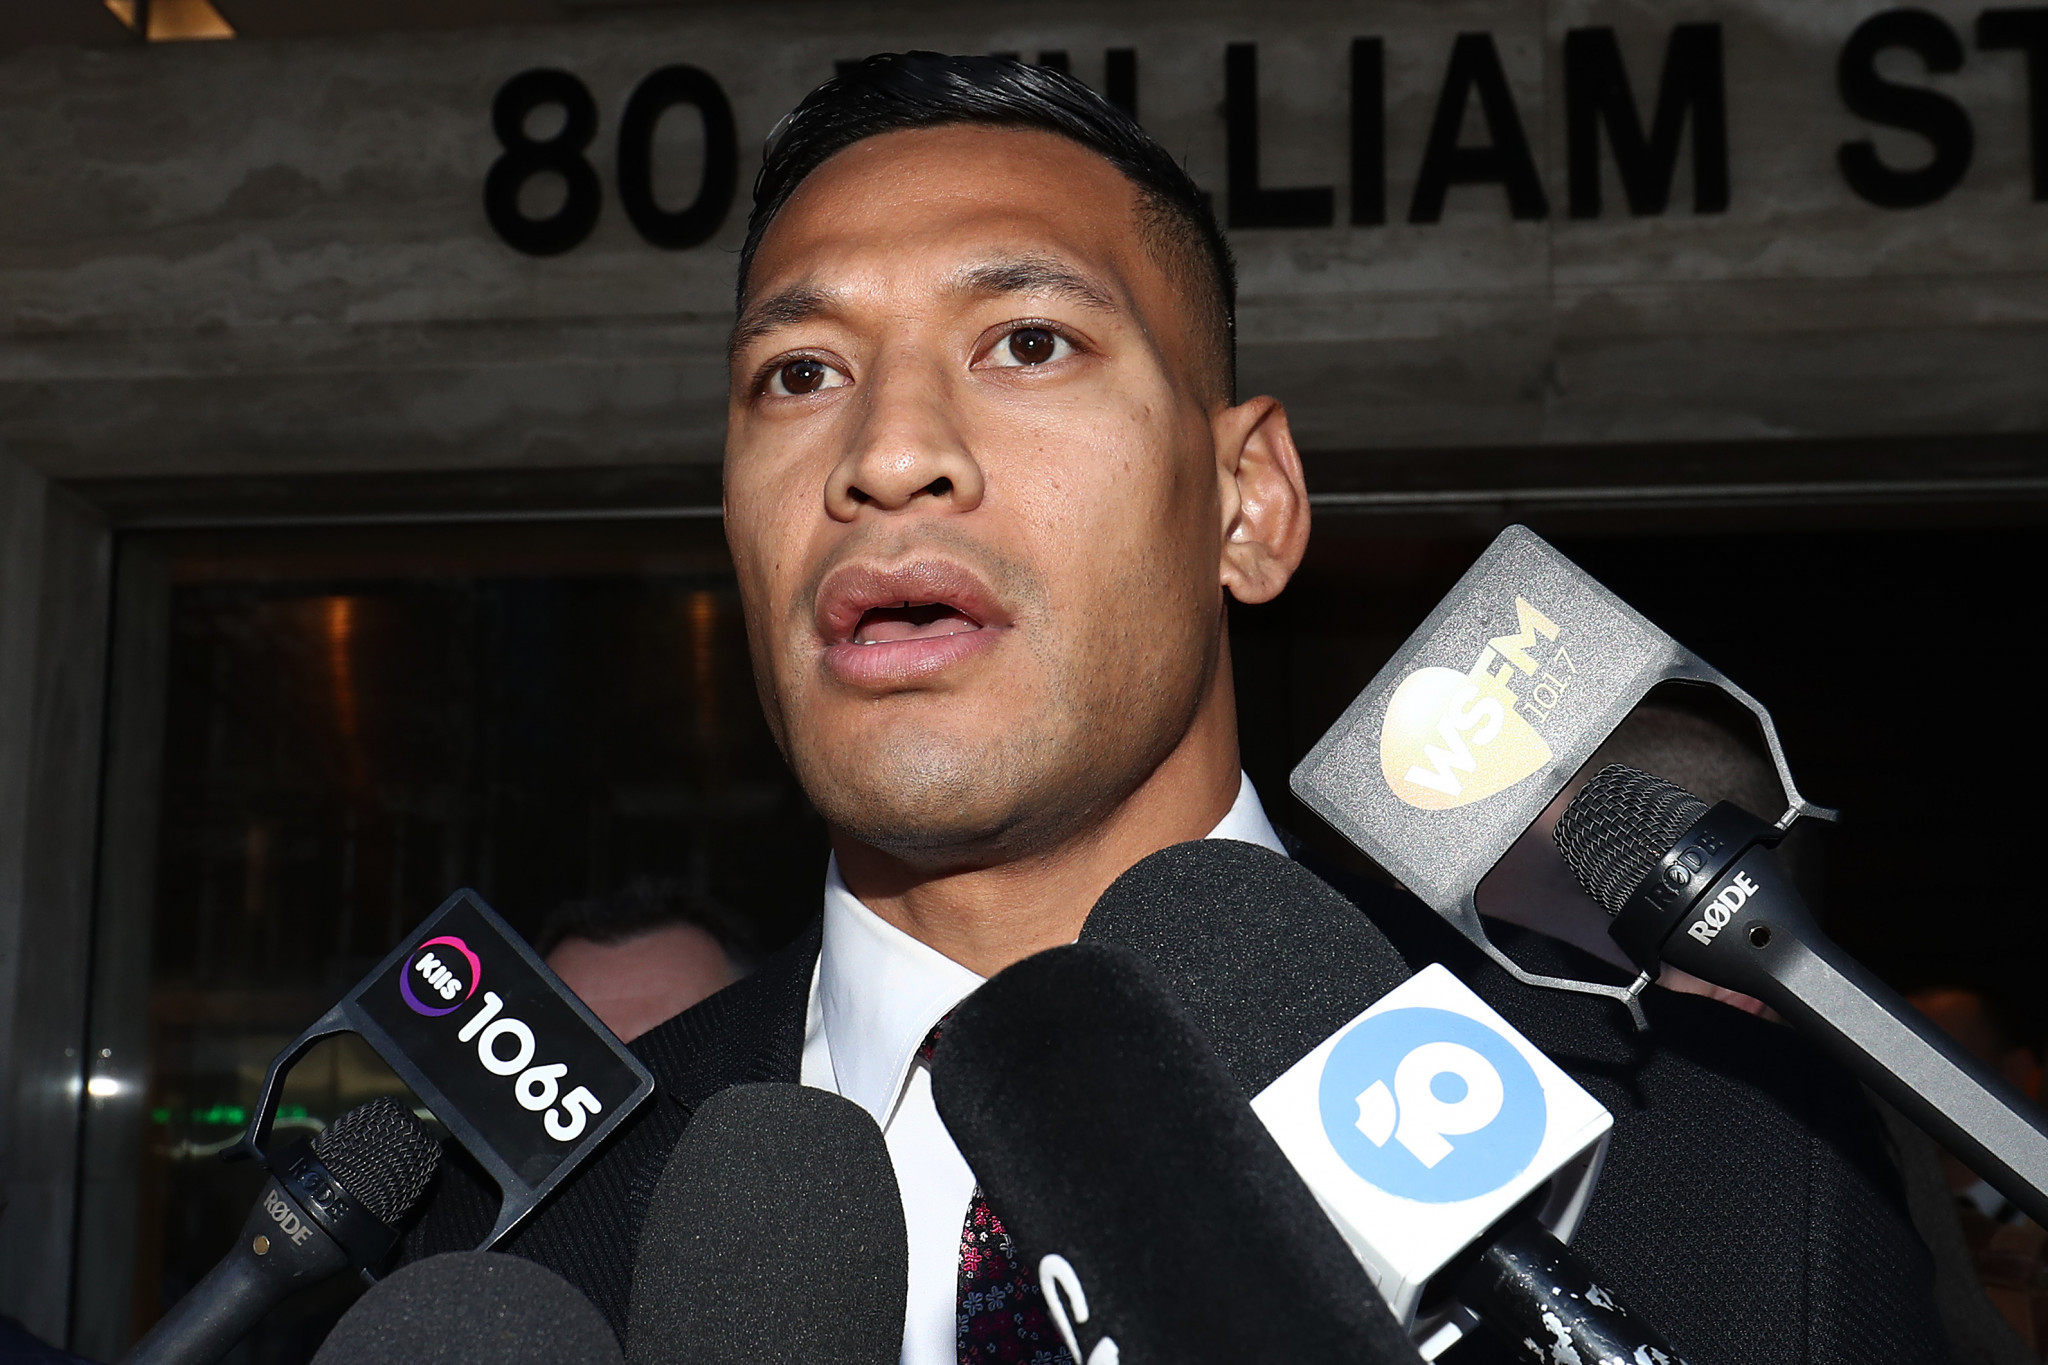 Israel Folau has launched legal proceedings against Rugby Australia after his sacking following homophobic comments on Instagram in April, claiming he was unfairly dismissed ©Getty Images